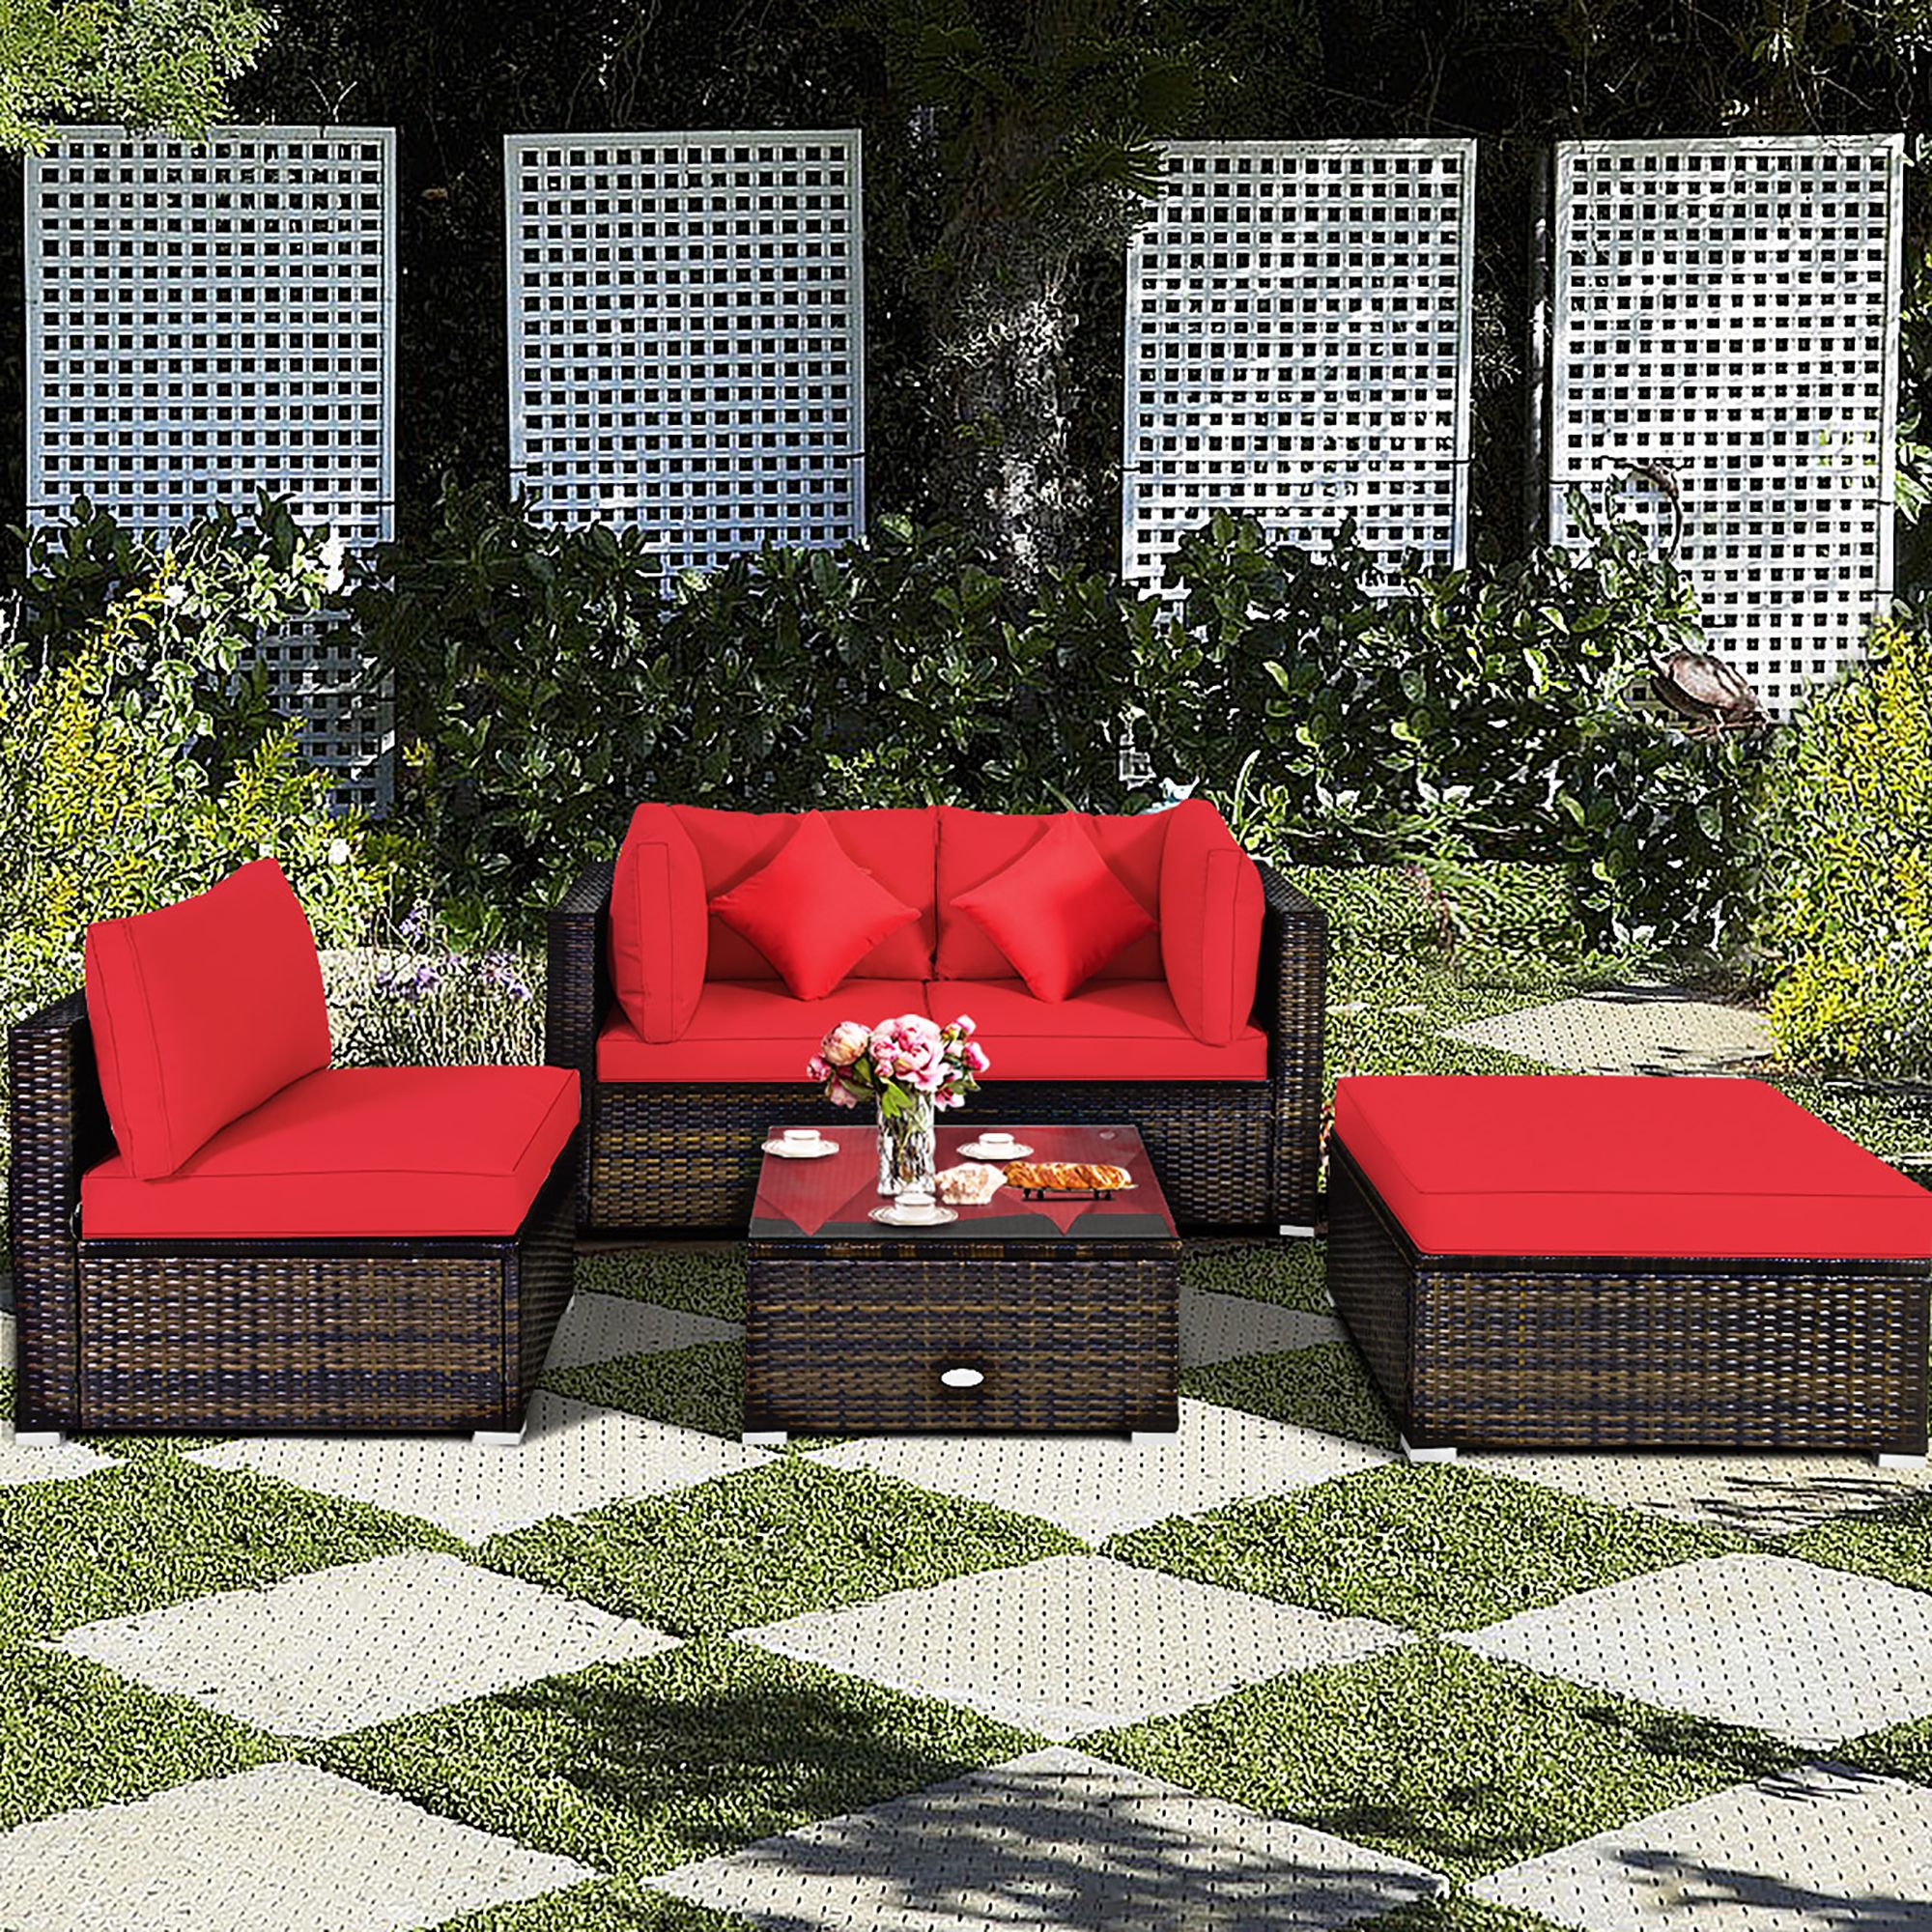 2019 Outdoor Seating Sectional Patio Sets With Regard To Costway 5pcs Outdoor Patio Rattan Furniture Set Sectional Conversation (View 5 of 15)